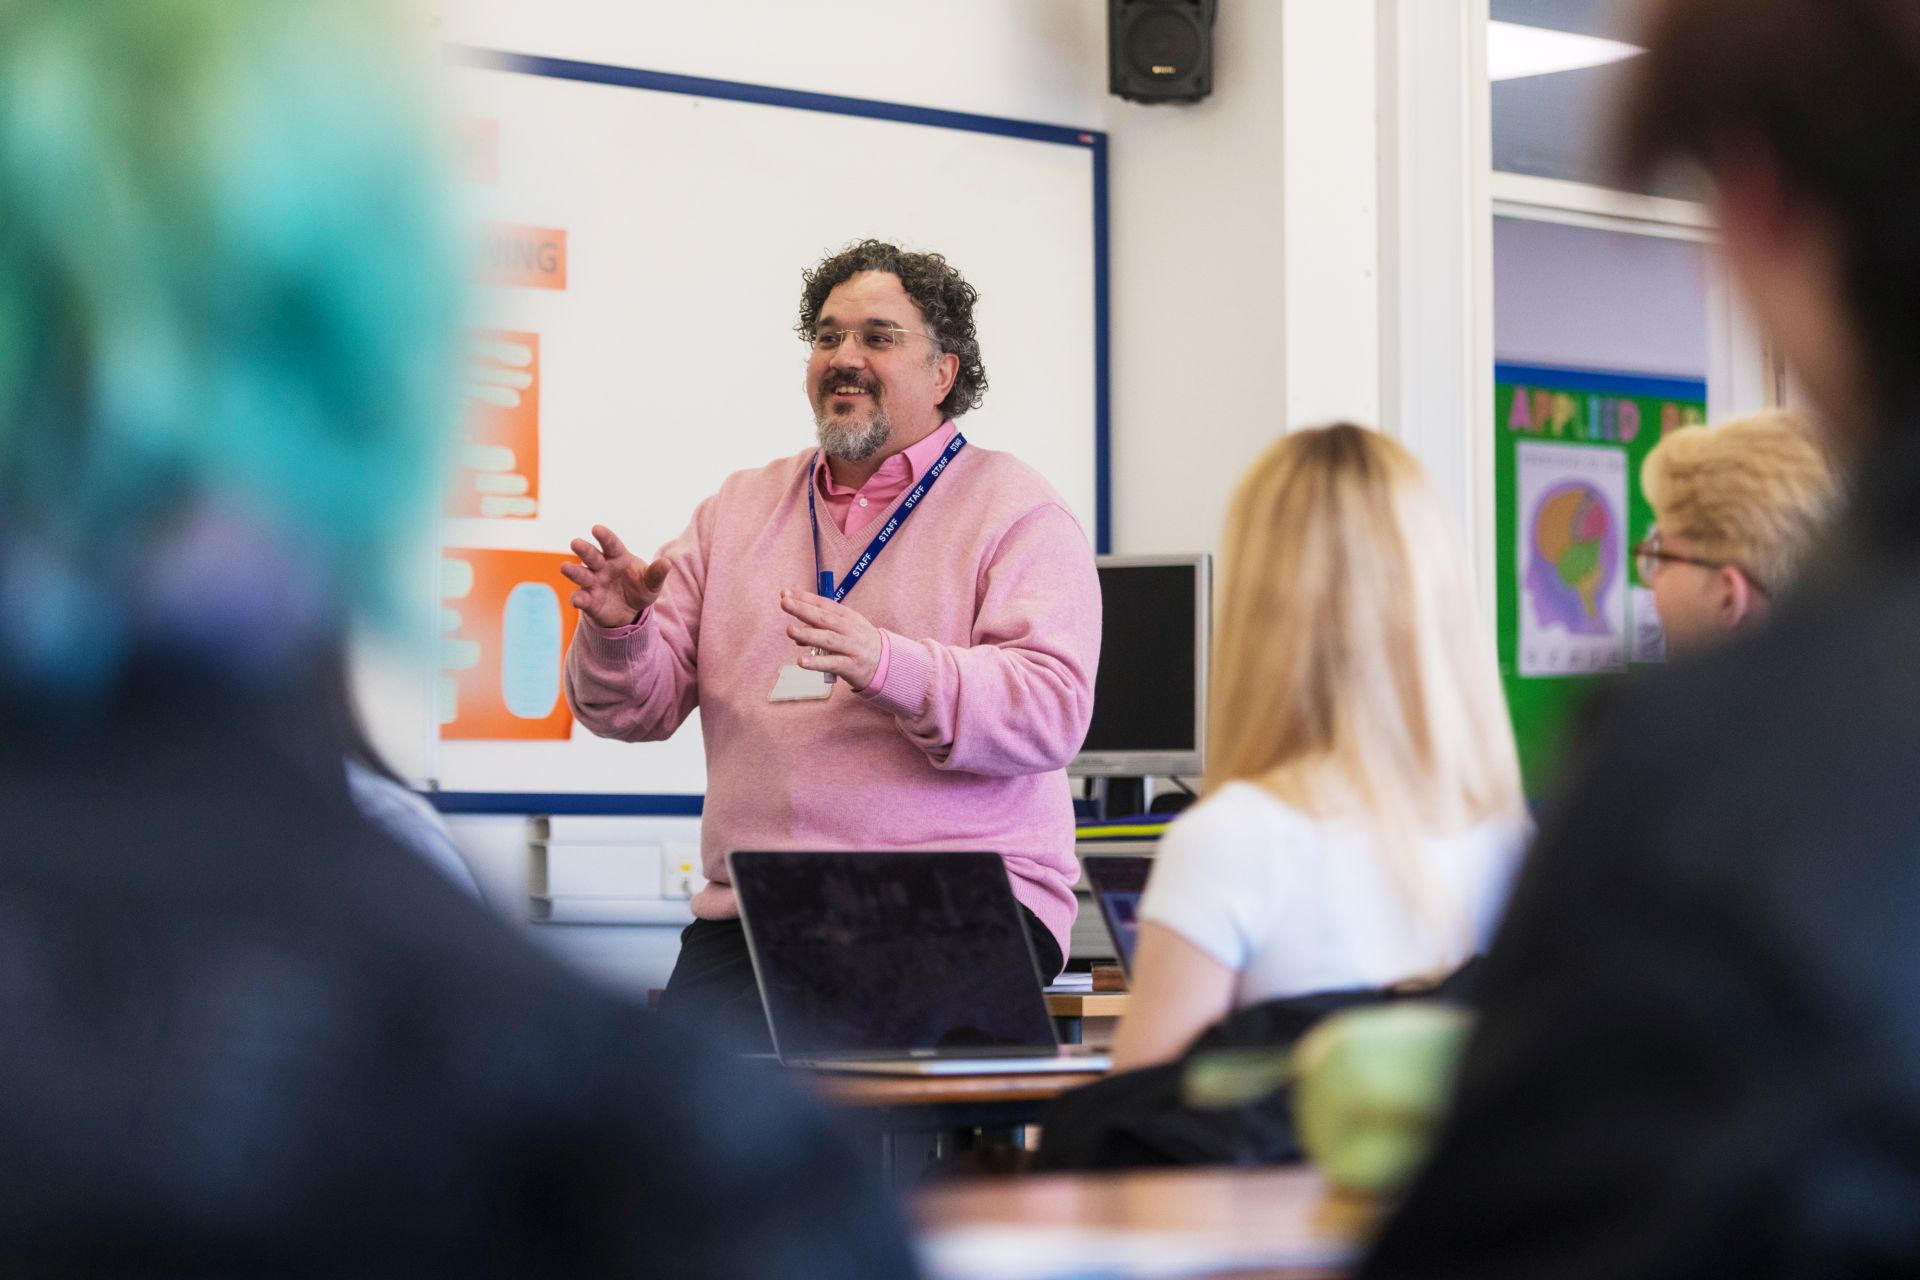 male teacher stood in front of a whiteboard talking to a class a students